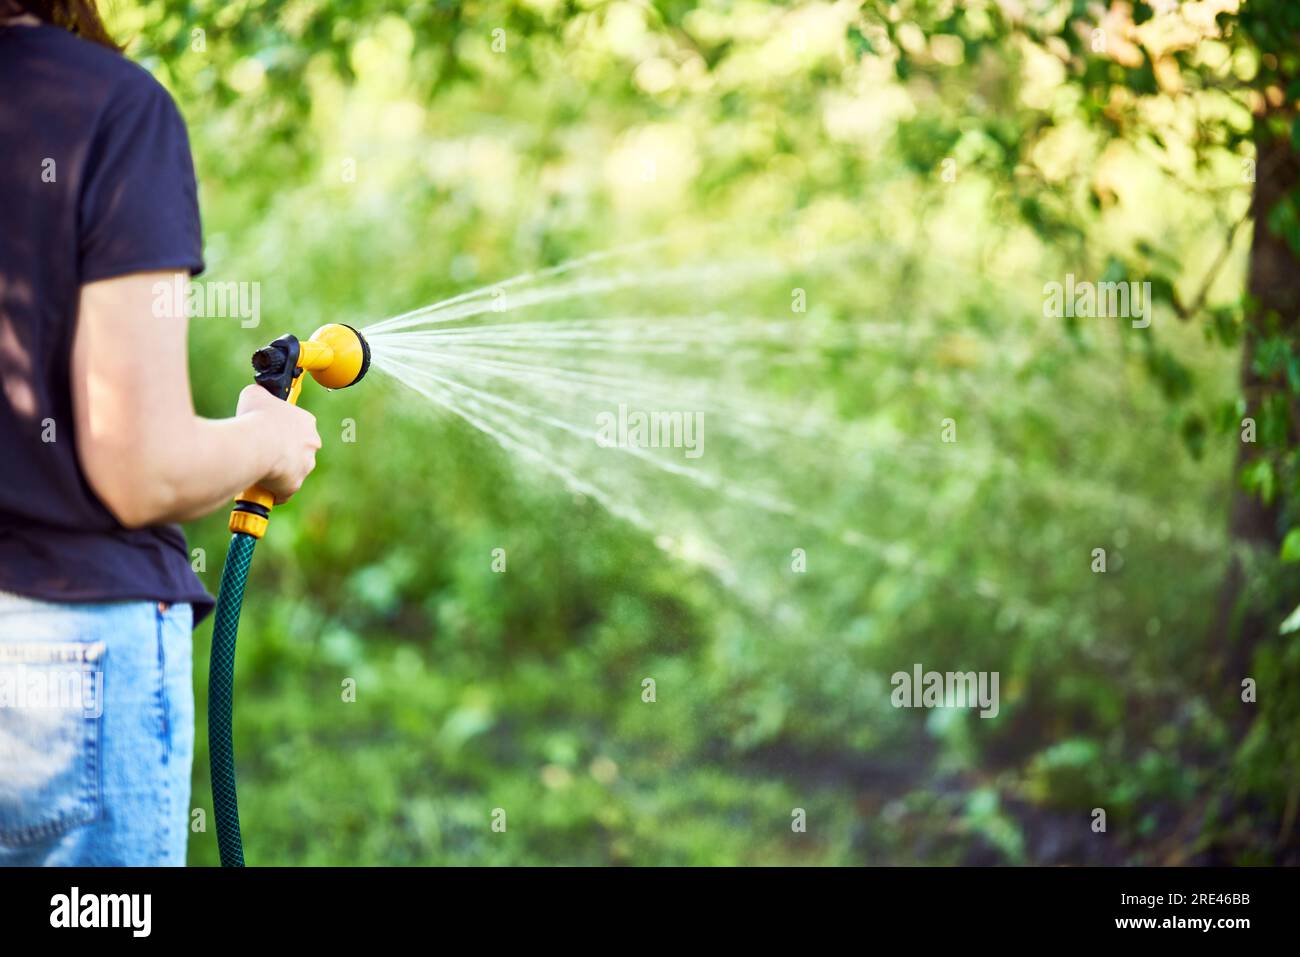 Cropped image of young woman watering flowers and plants in garden with hose in sunny blooming backyard. Gardening work, summer time Stock Photo